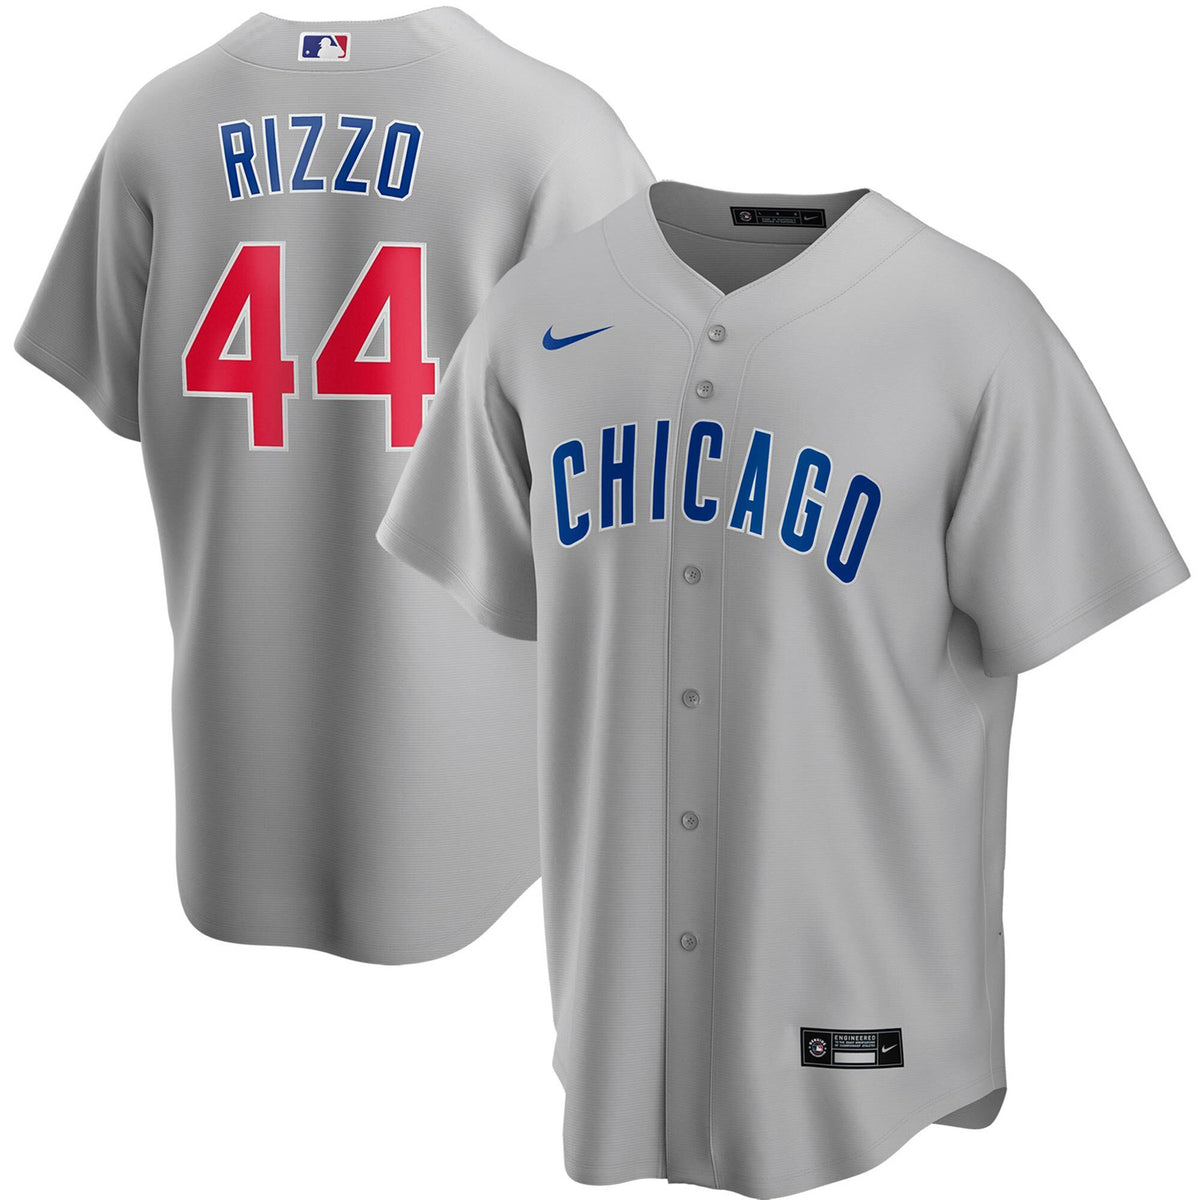 Anthony Rizzo Chicago Cubs Game Used Jersey “238th Career HR” MLB Auth